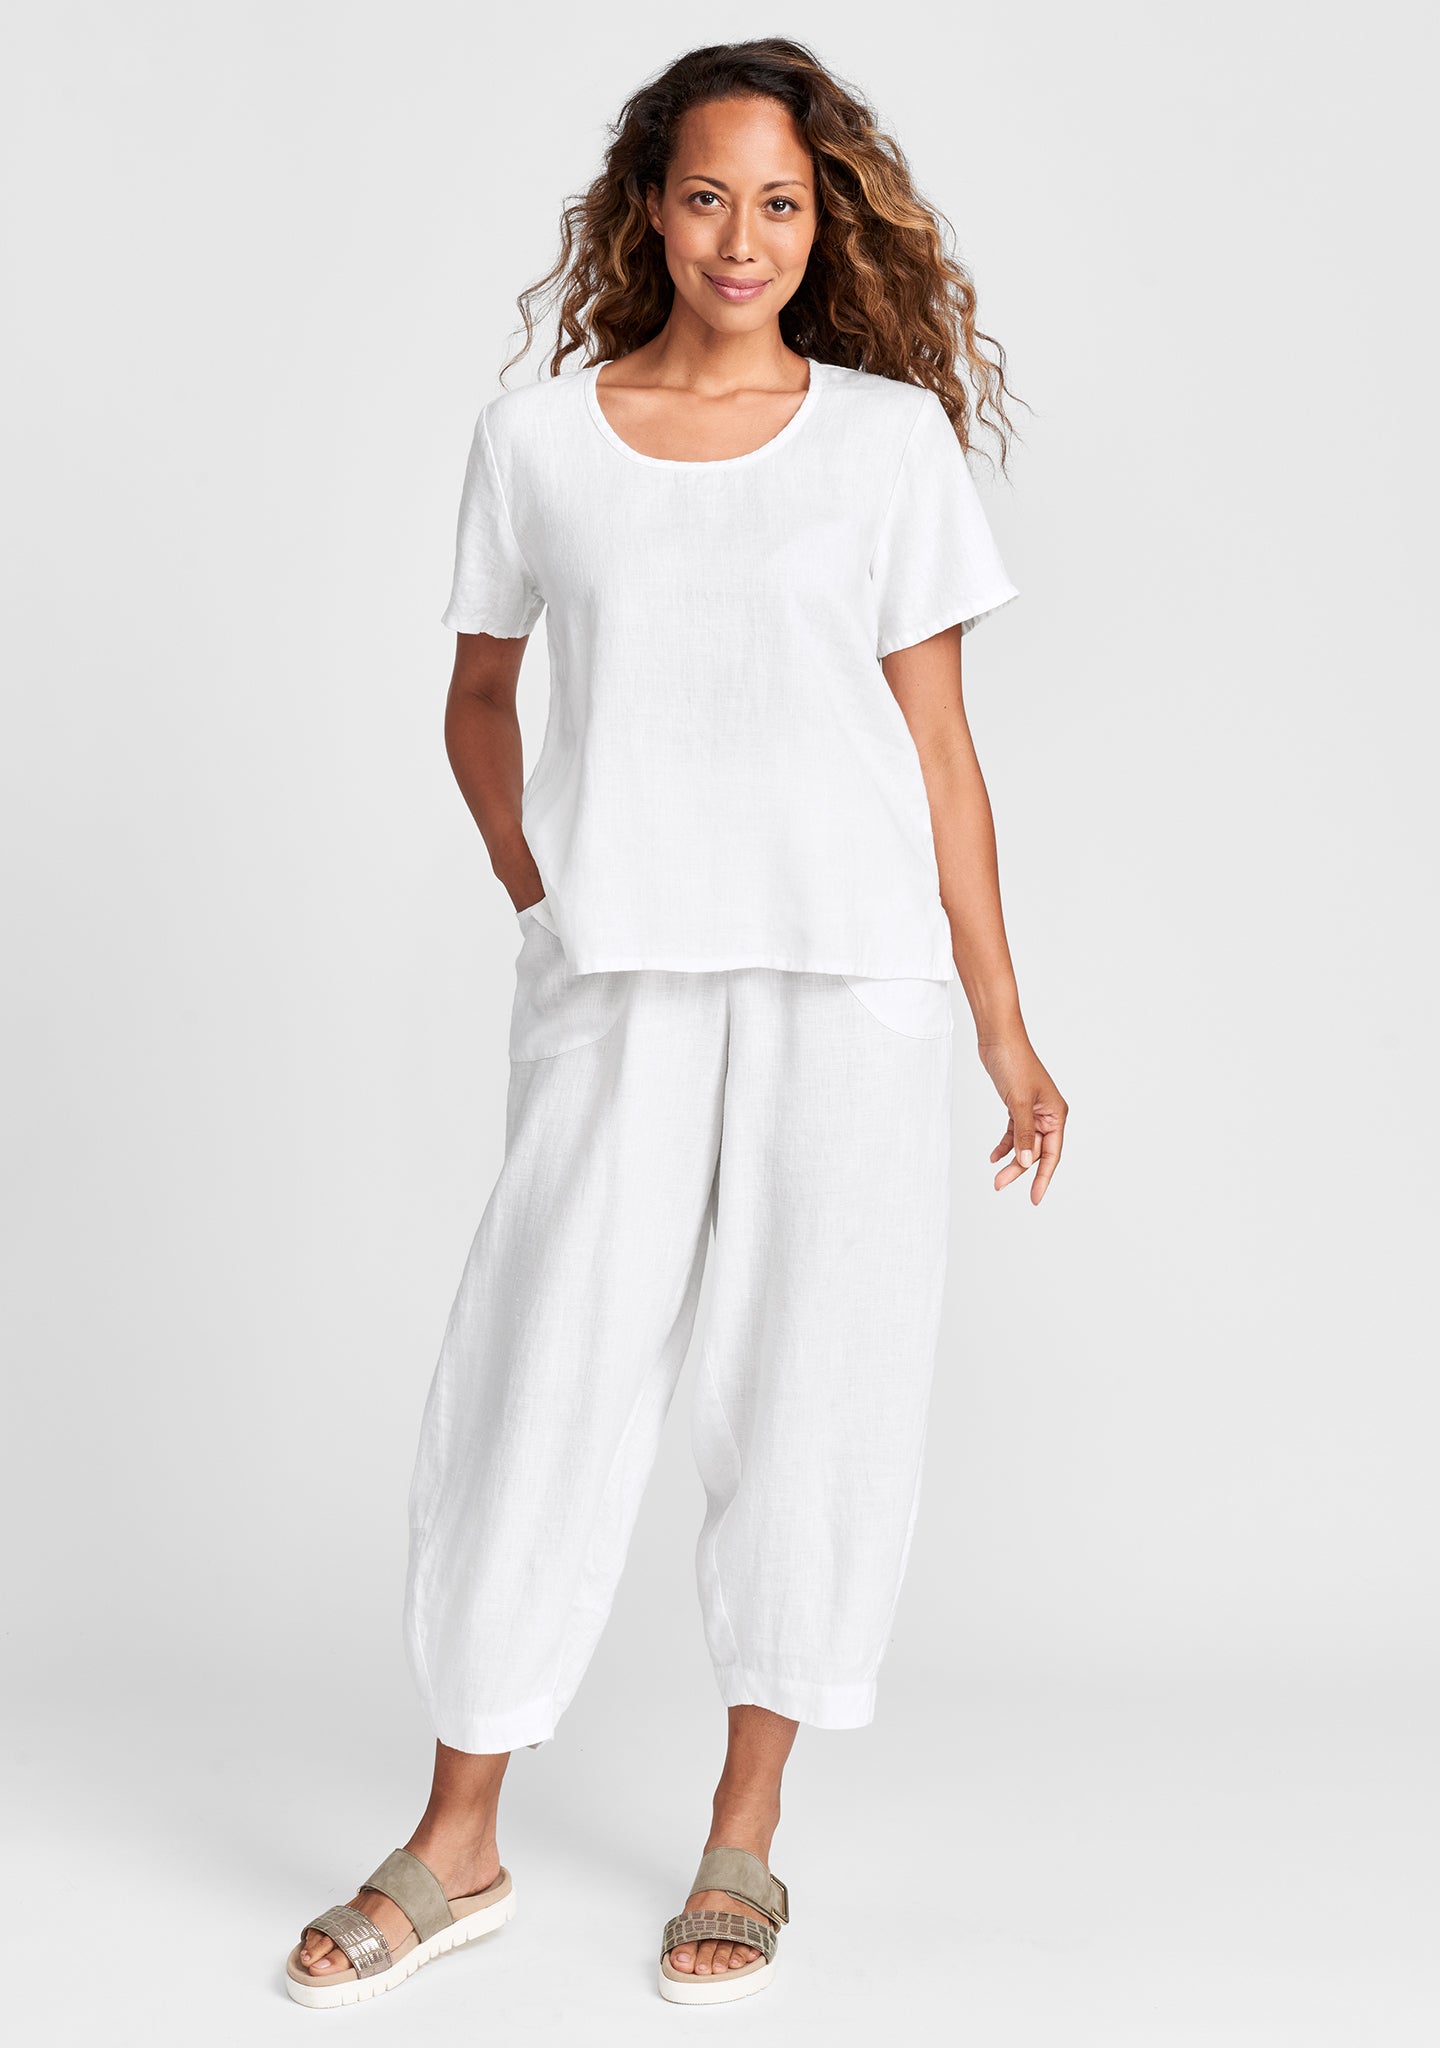 FLAX linen shirt in white with linen pants in white